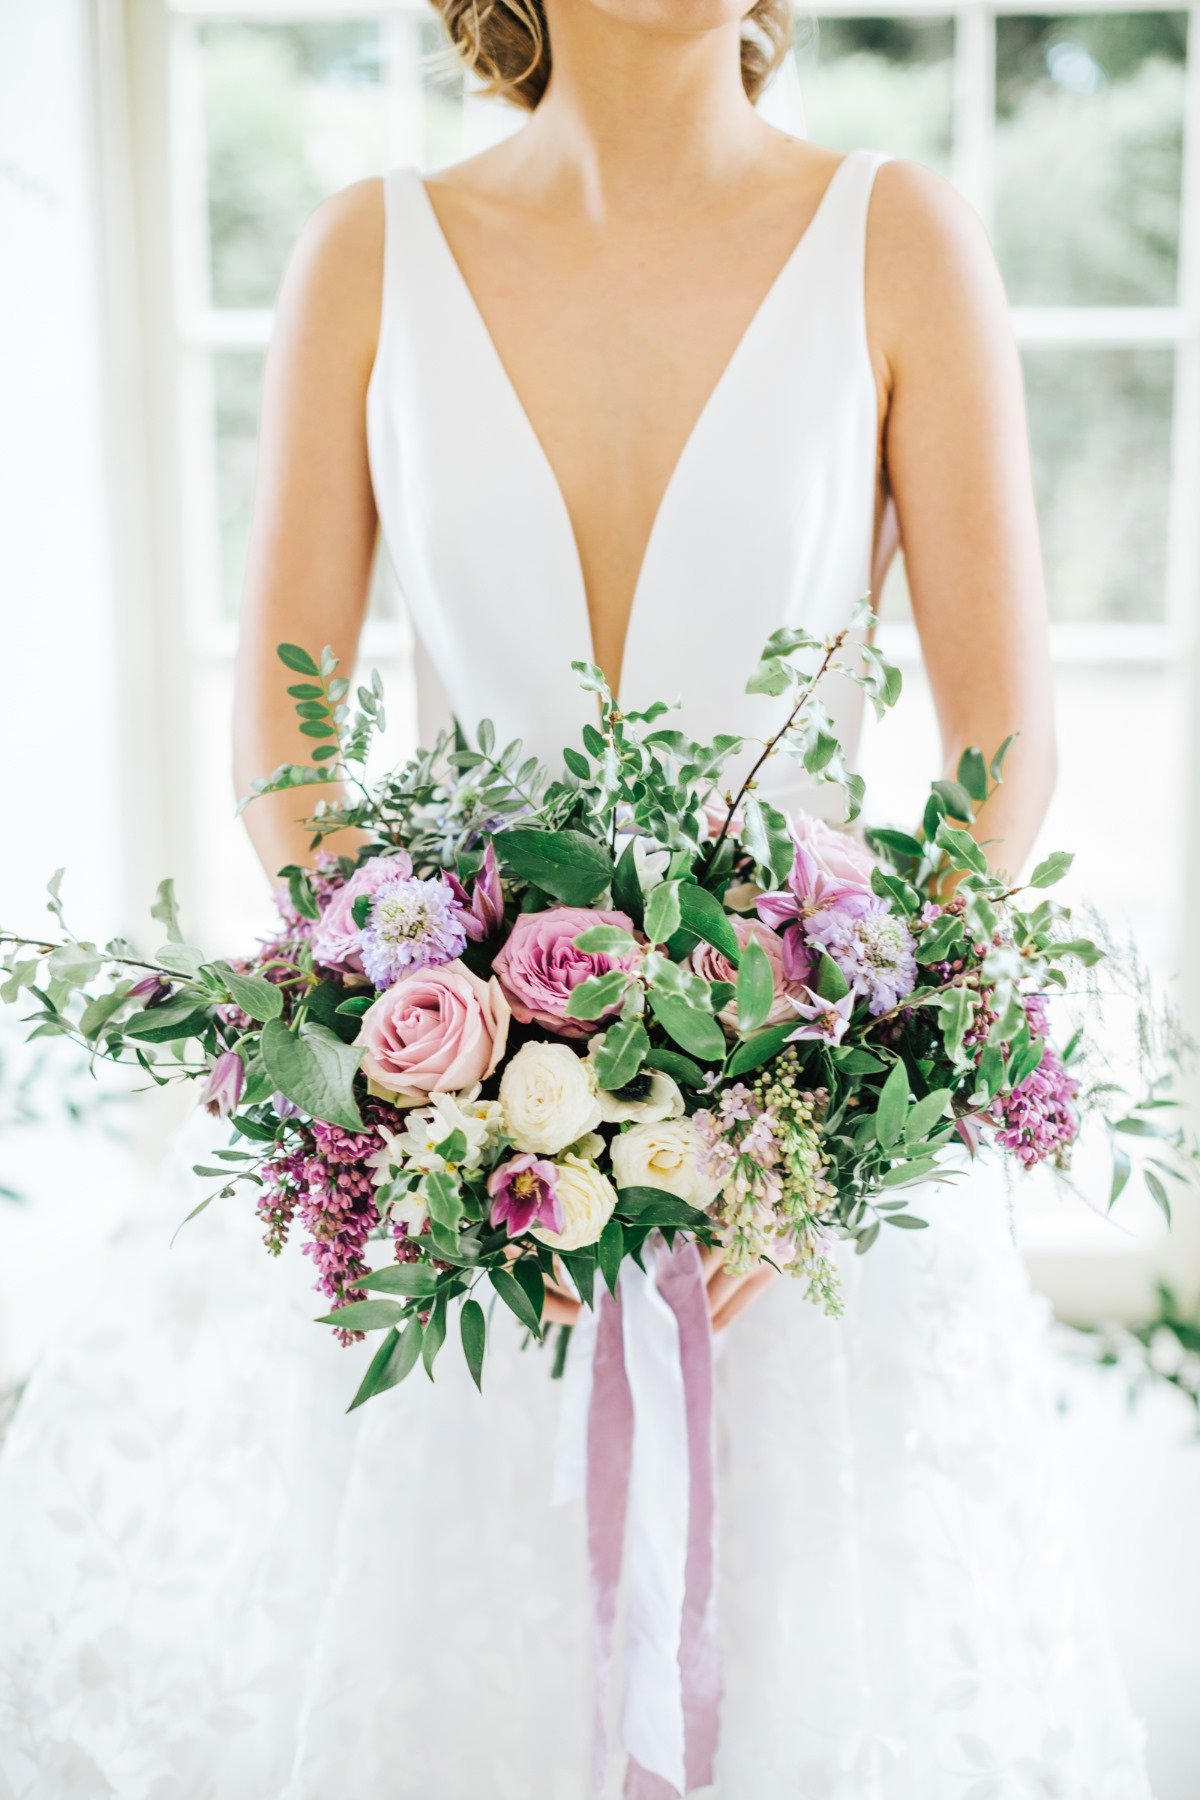 Lavender wedding bouquet designed by Willow & Blossom